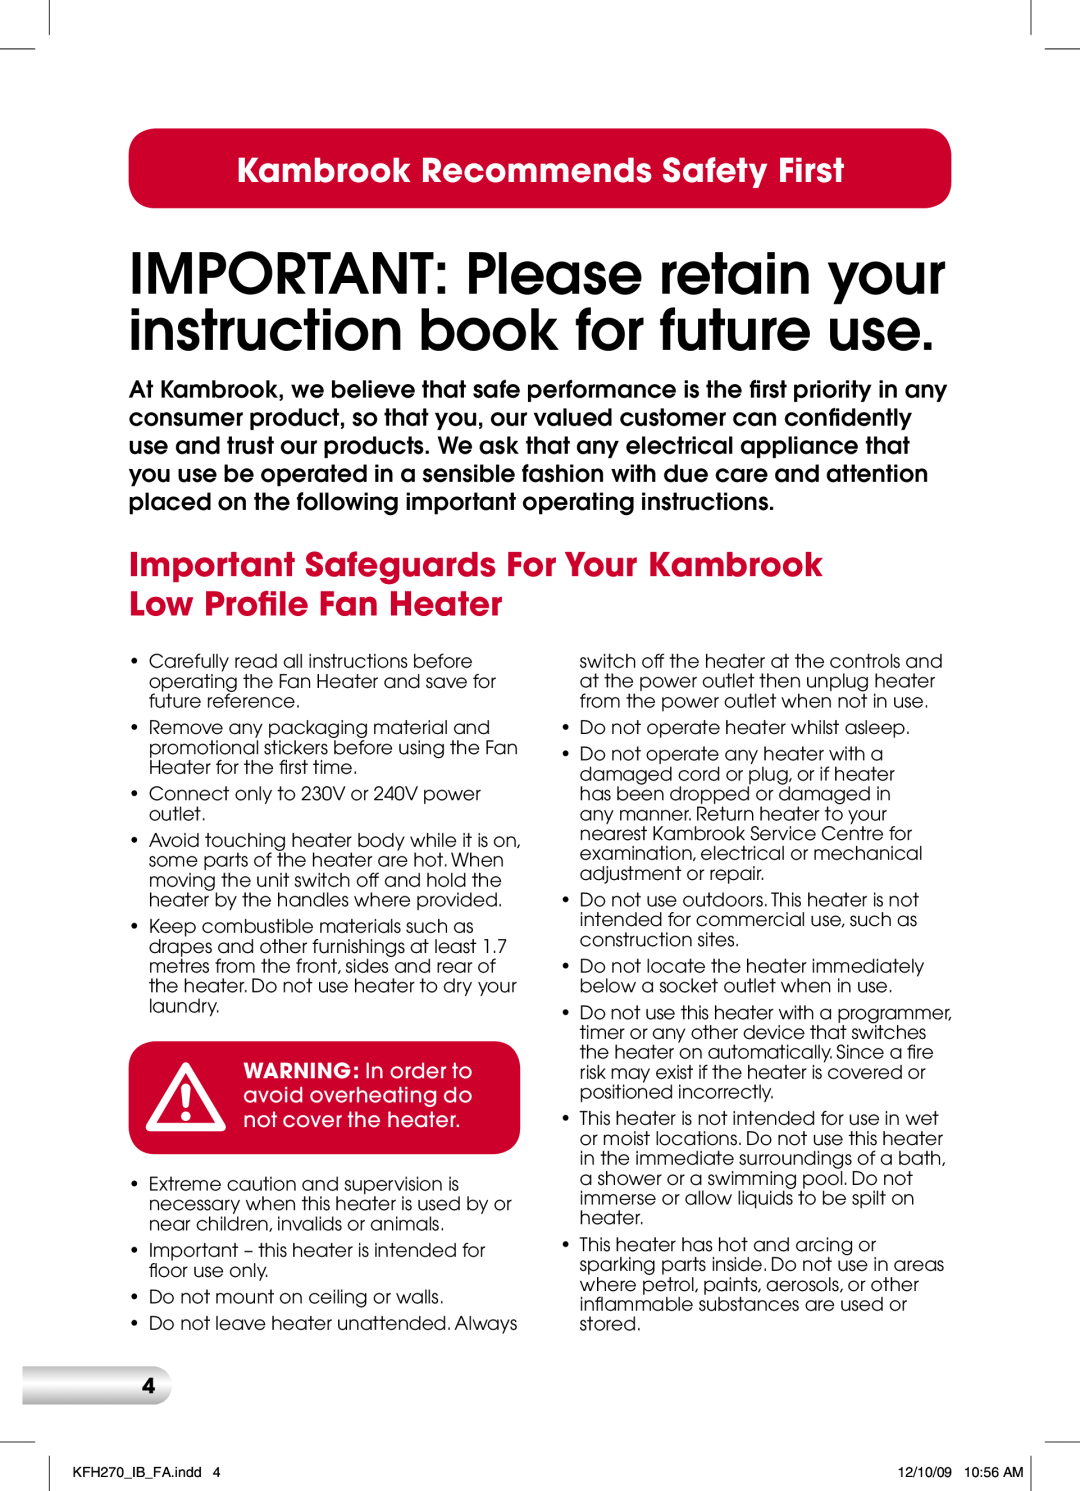 Kambrook KFH270 manual Kambrook Recommends Safety First 